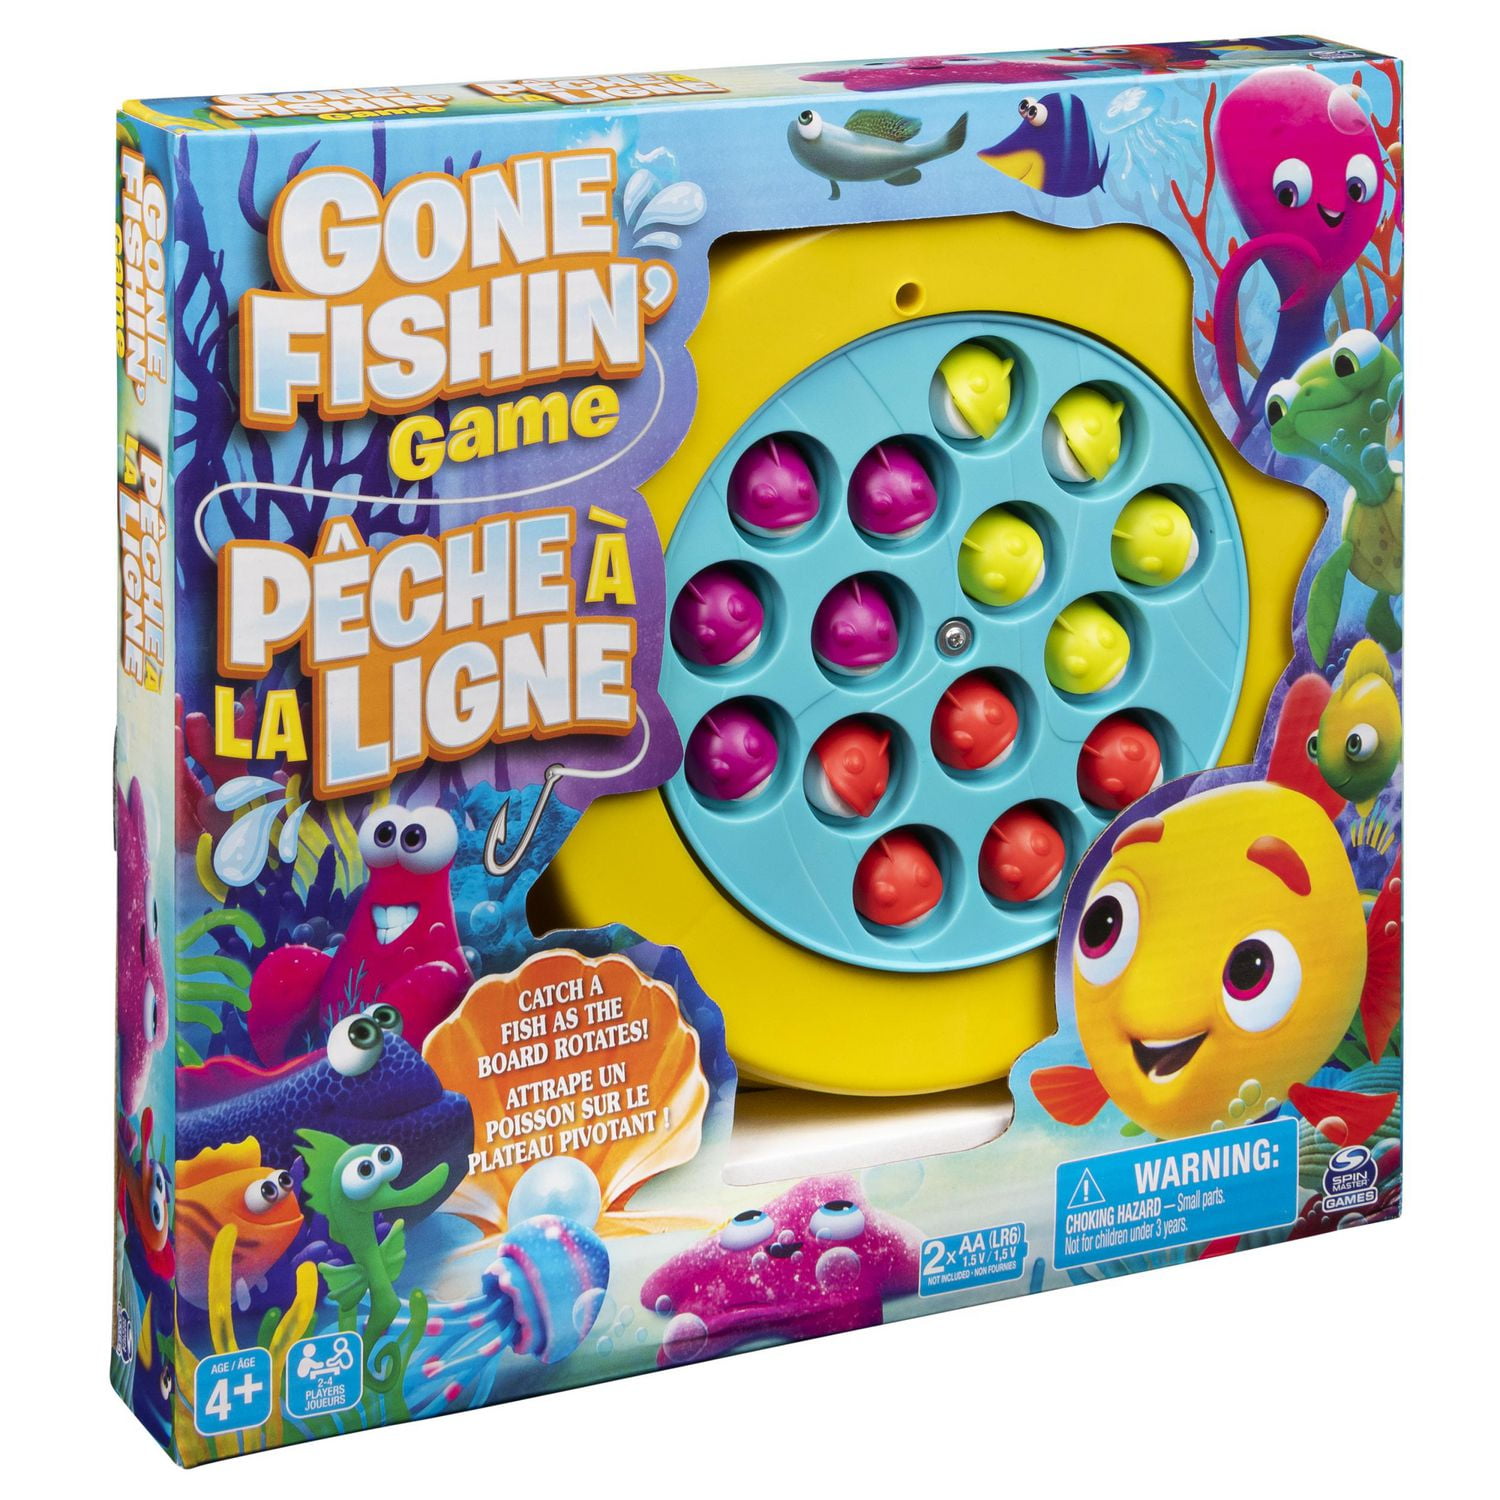 Rotating Fishing Game Kids Toy, Board Game For 3-5 Years Old Kids